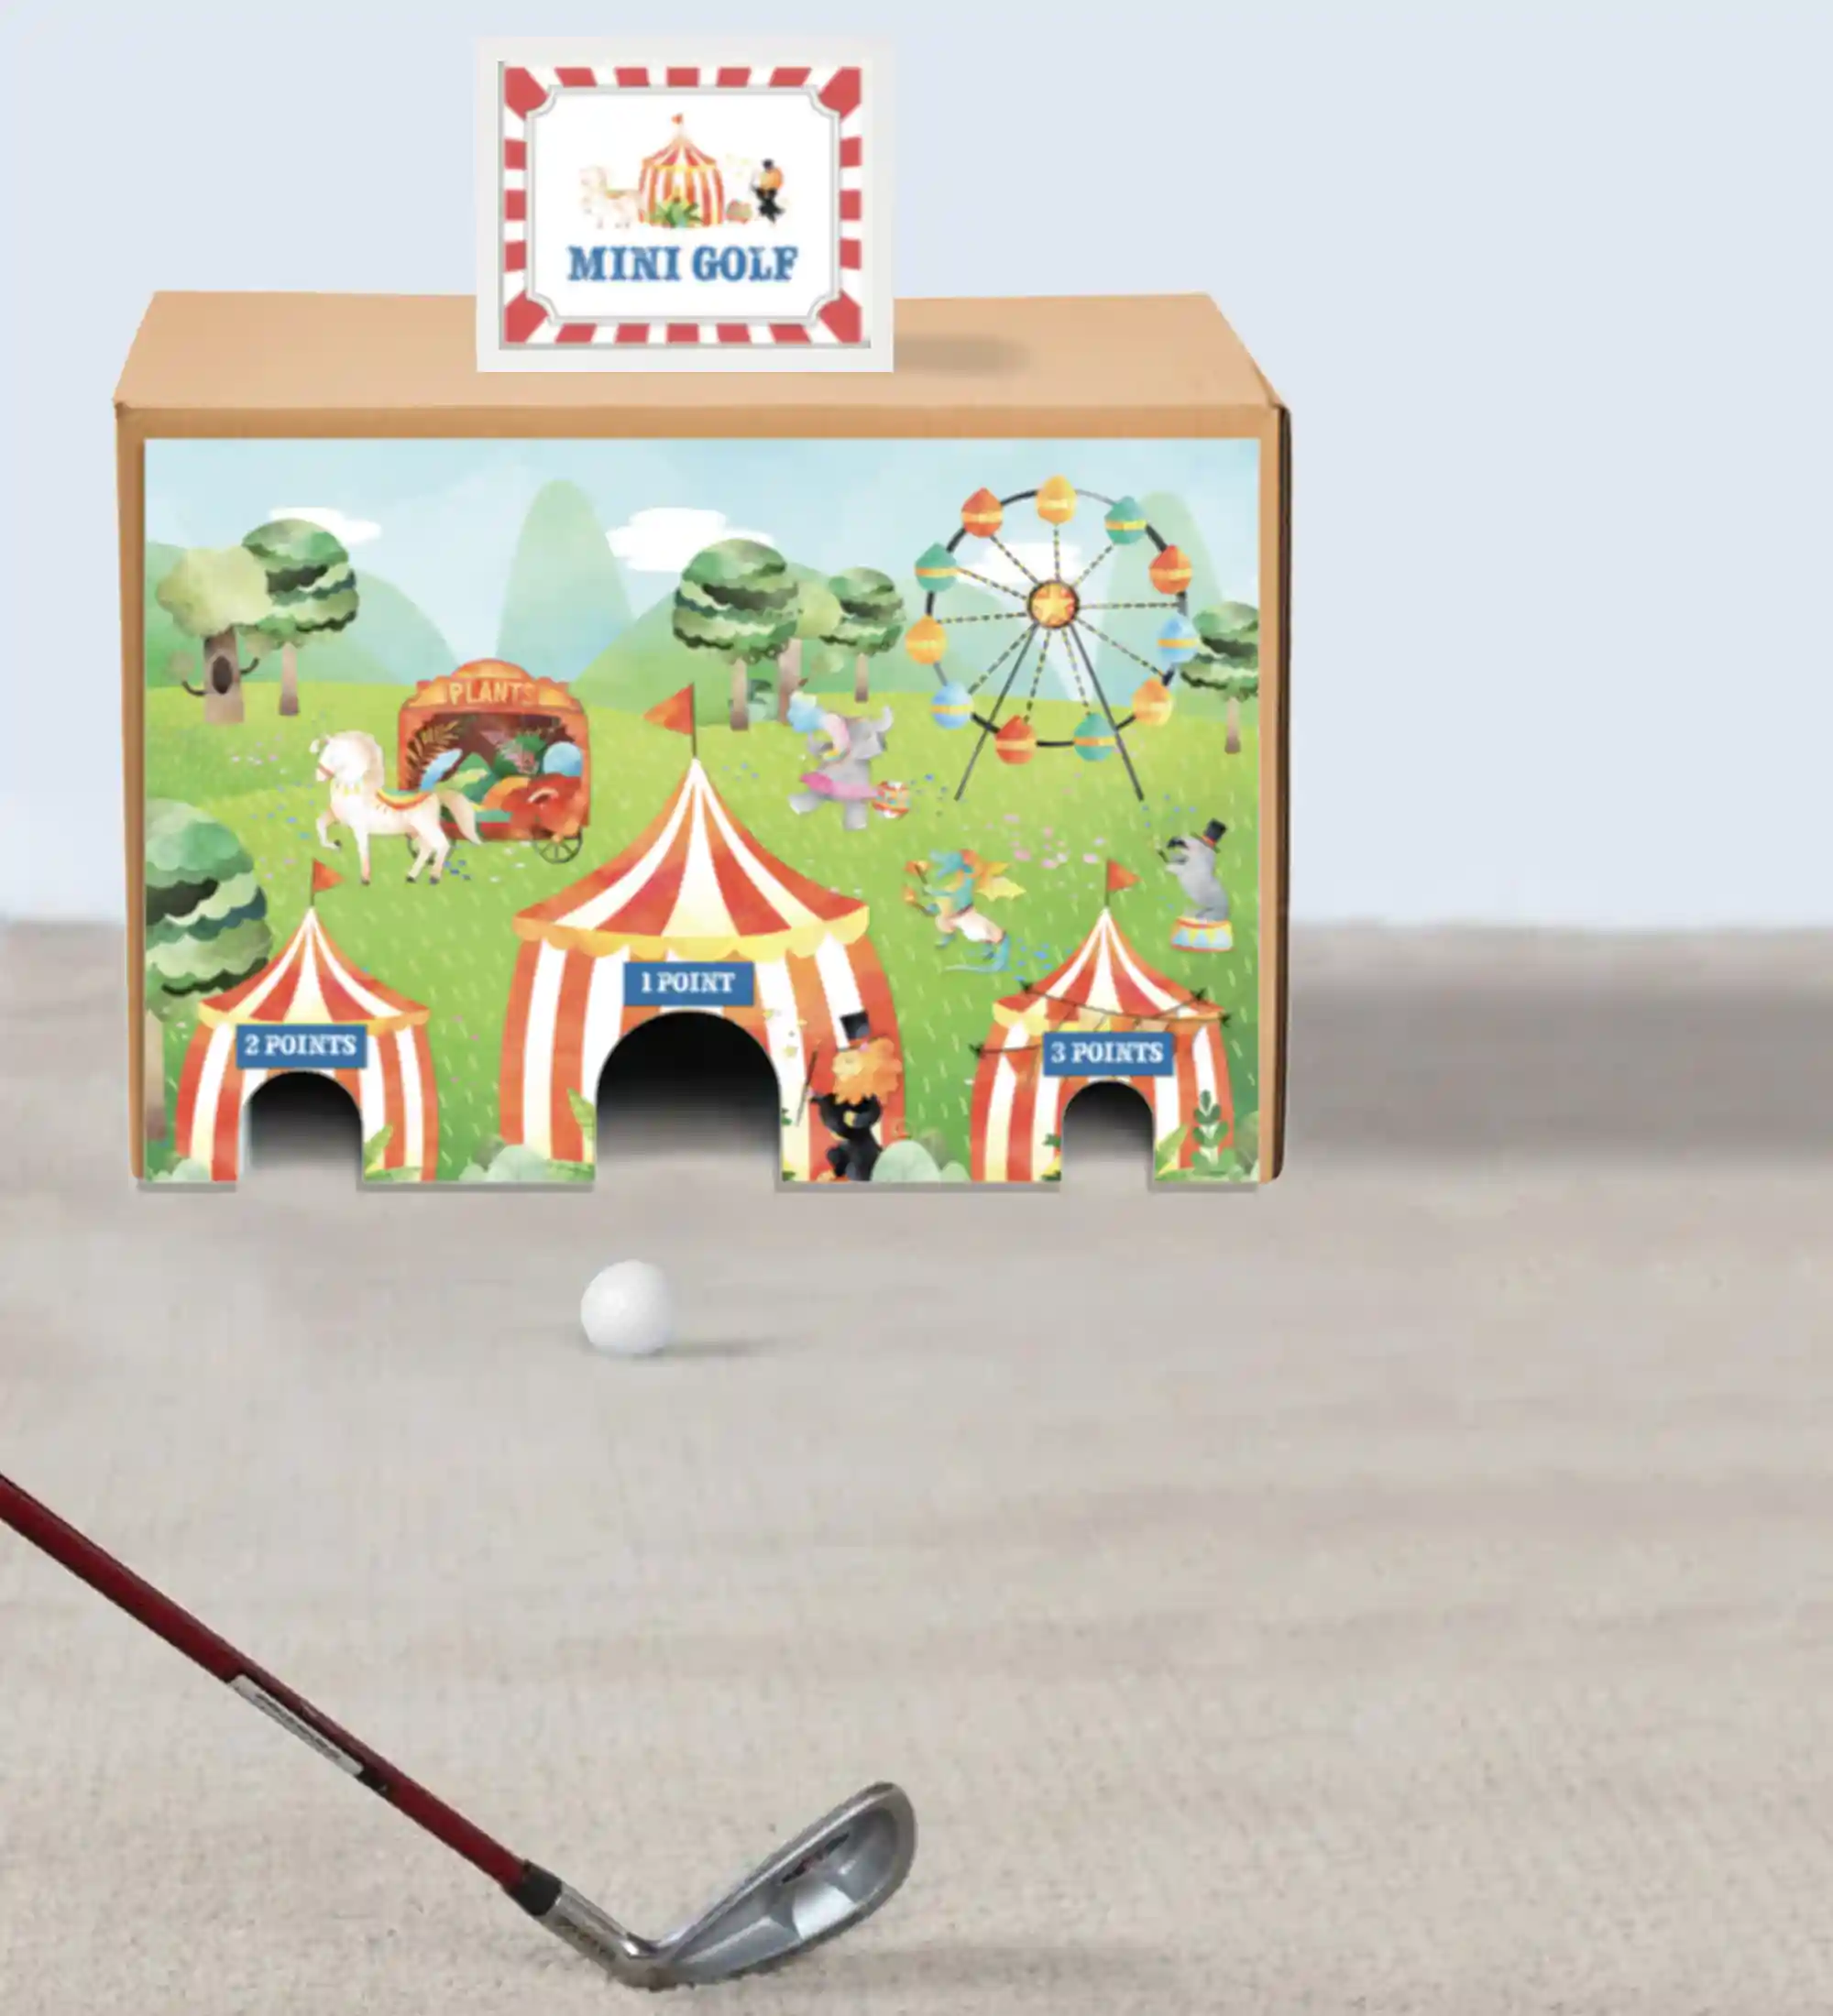 Minitaure golf printable game for a carnvial birthday party or circus themed birthday celebrations. Fun and easy game for a school carnival fundraiser and church carnival or church fall festival. Also use as a Hole in One DIY kids party game.